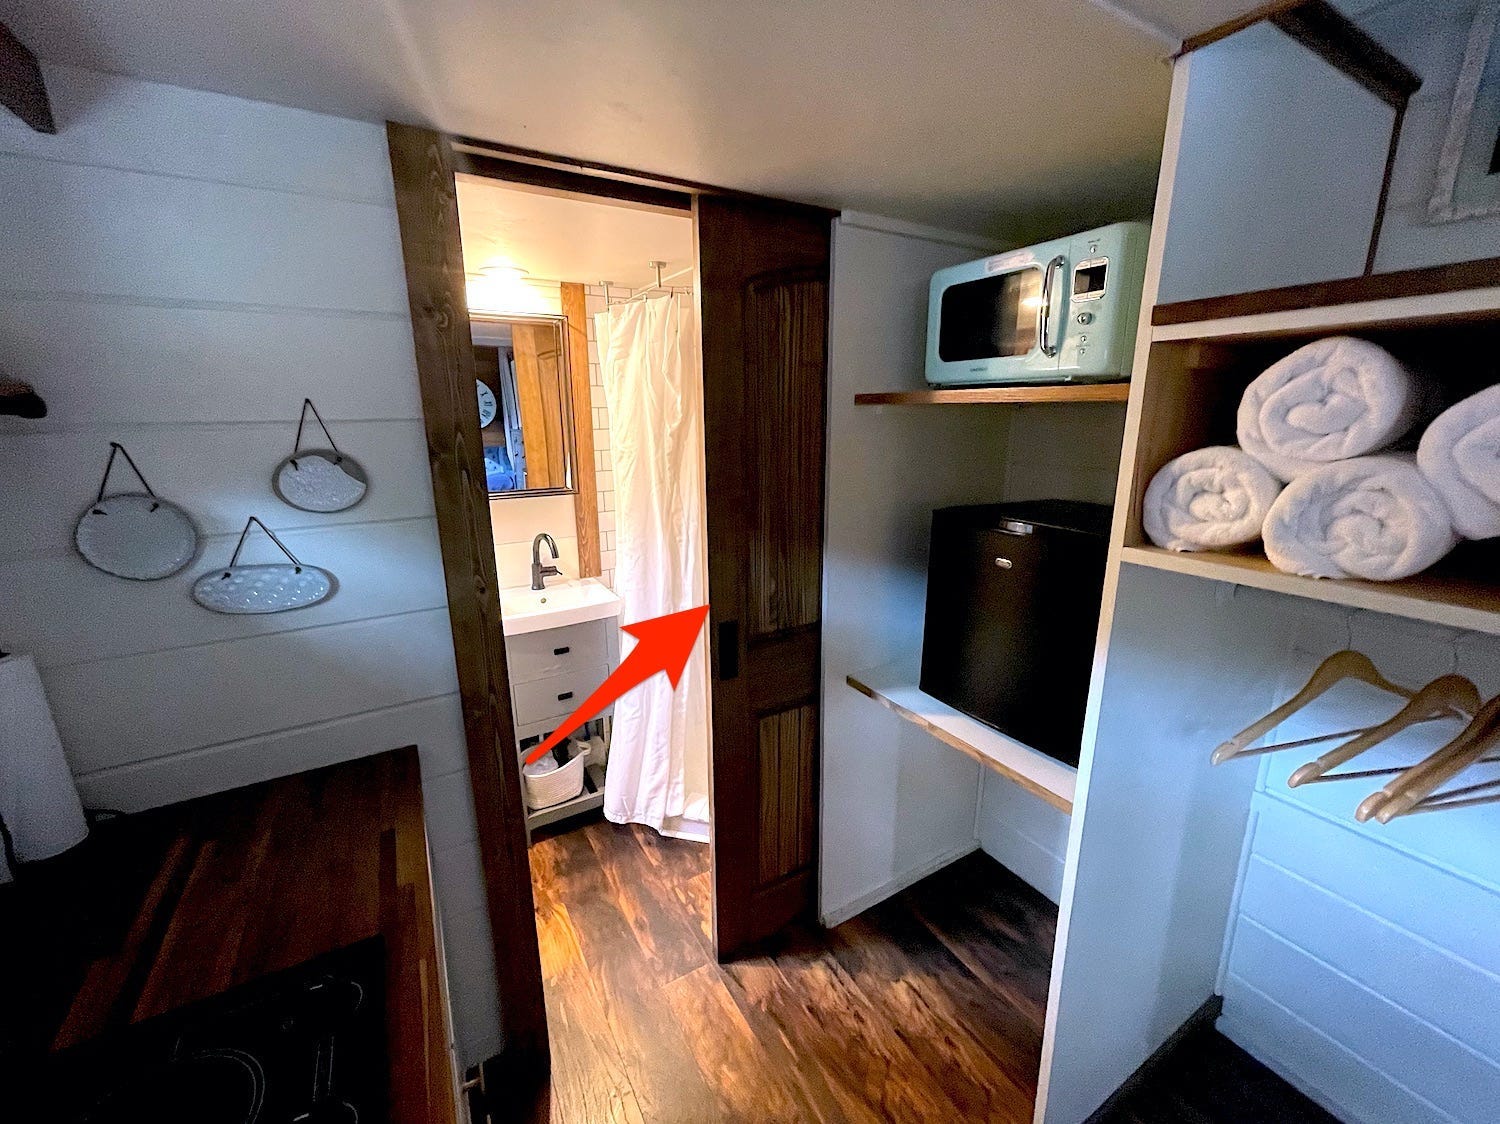 An arrow points to the pocket door, which separated the bathroom from the rest of the tiny house.